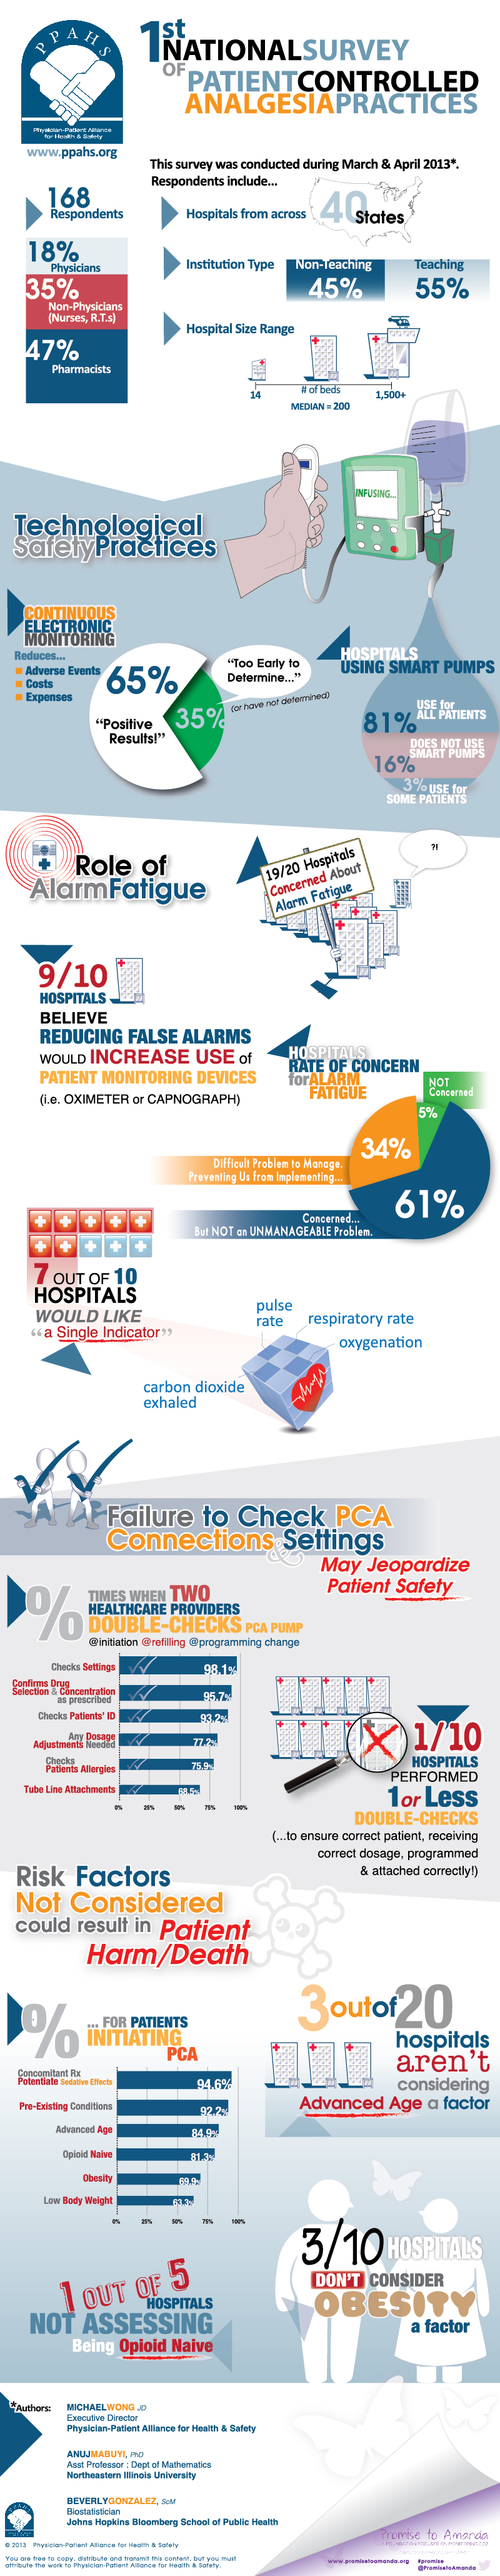 INFOGRAPHIC: First National Survey of Patient-Controlled Analgesia Practices